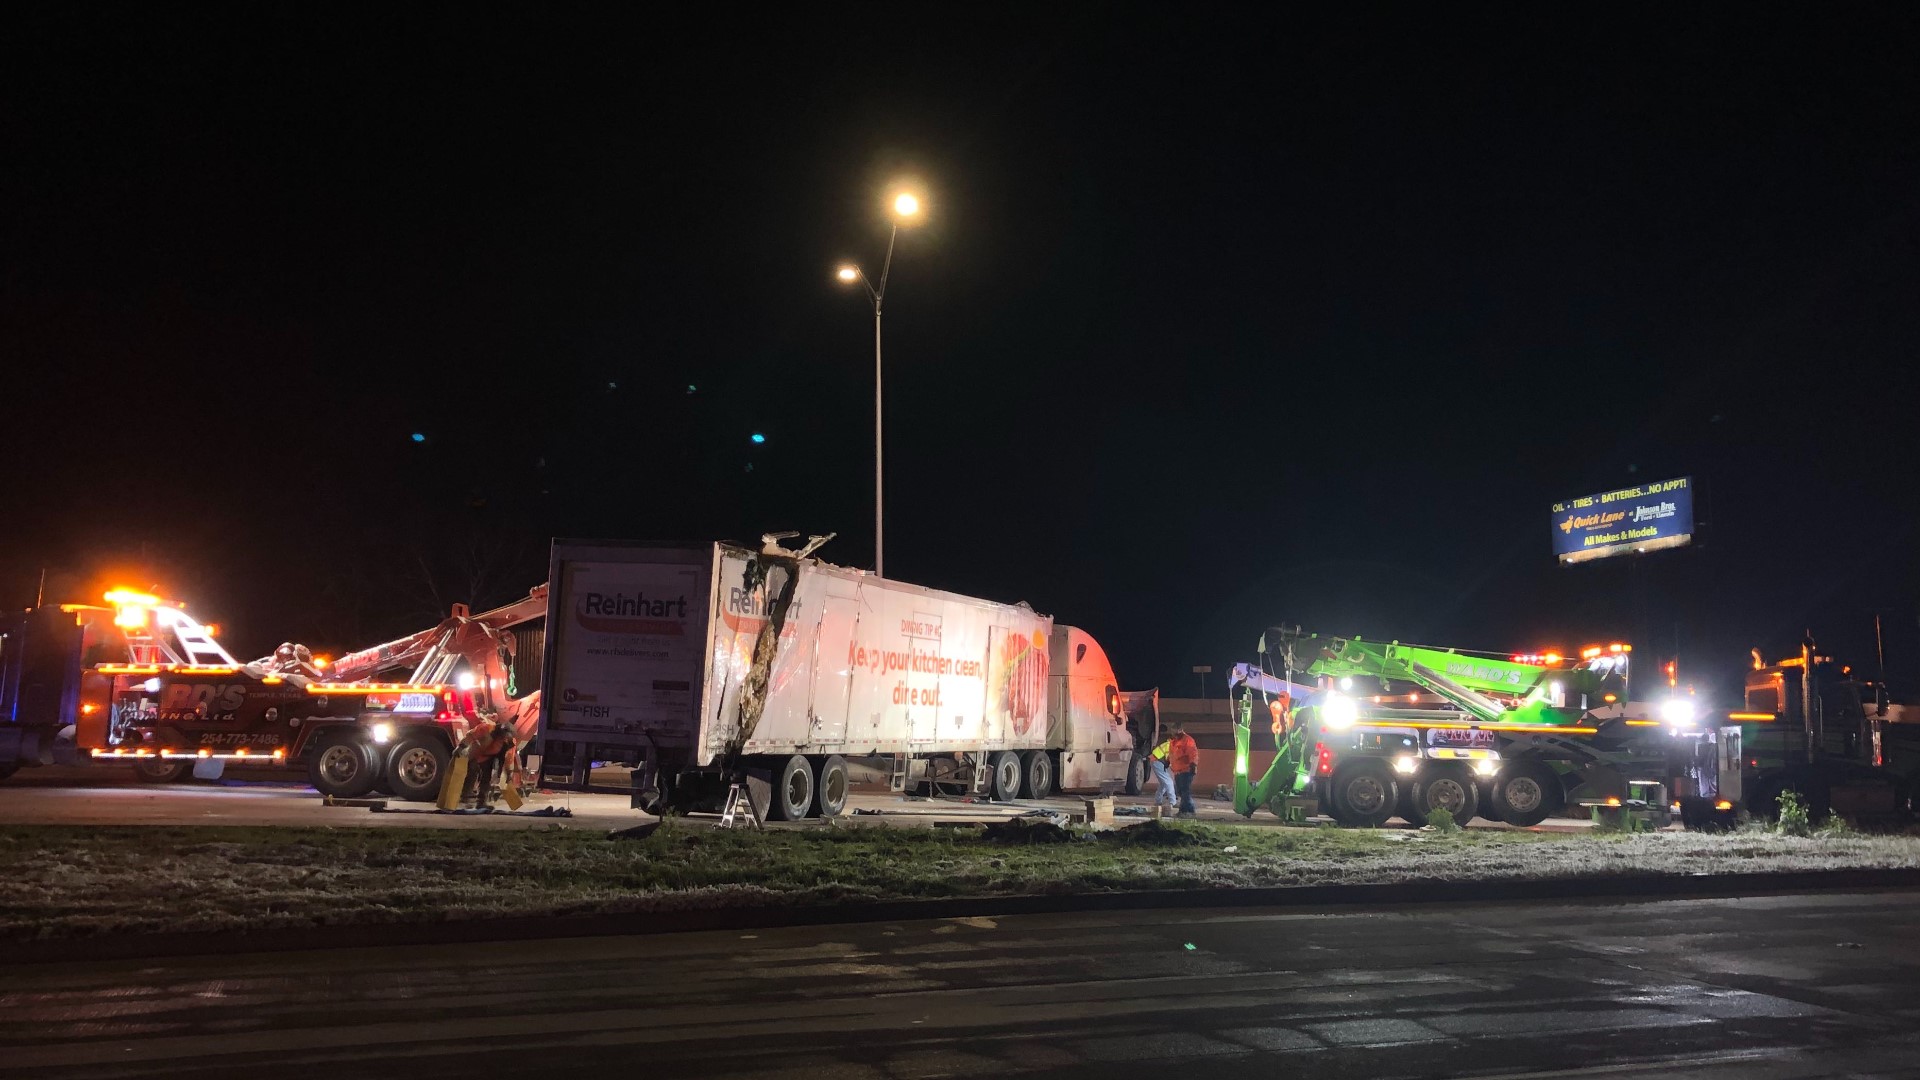 An 18-wheeler accident on I-35 in Temple caused traffic delays early Thursday morning.